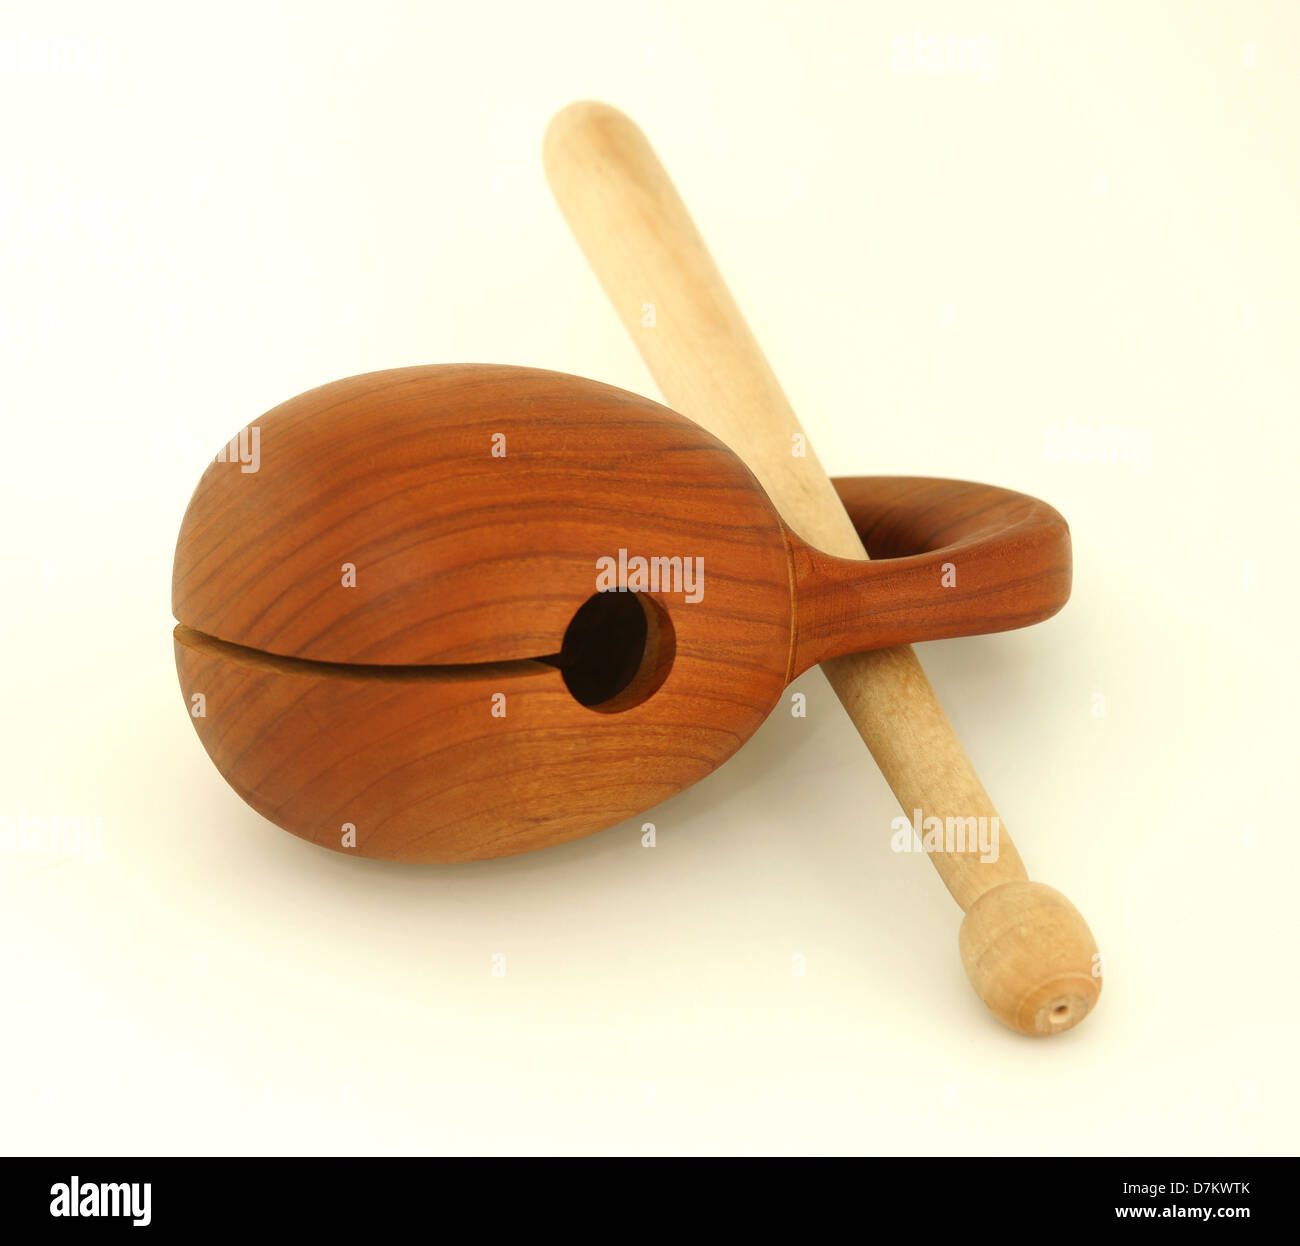 Moktak is a Korean-style wooden fish. Musical percussion